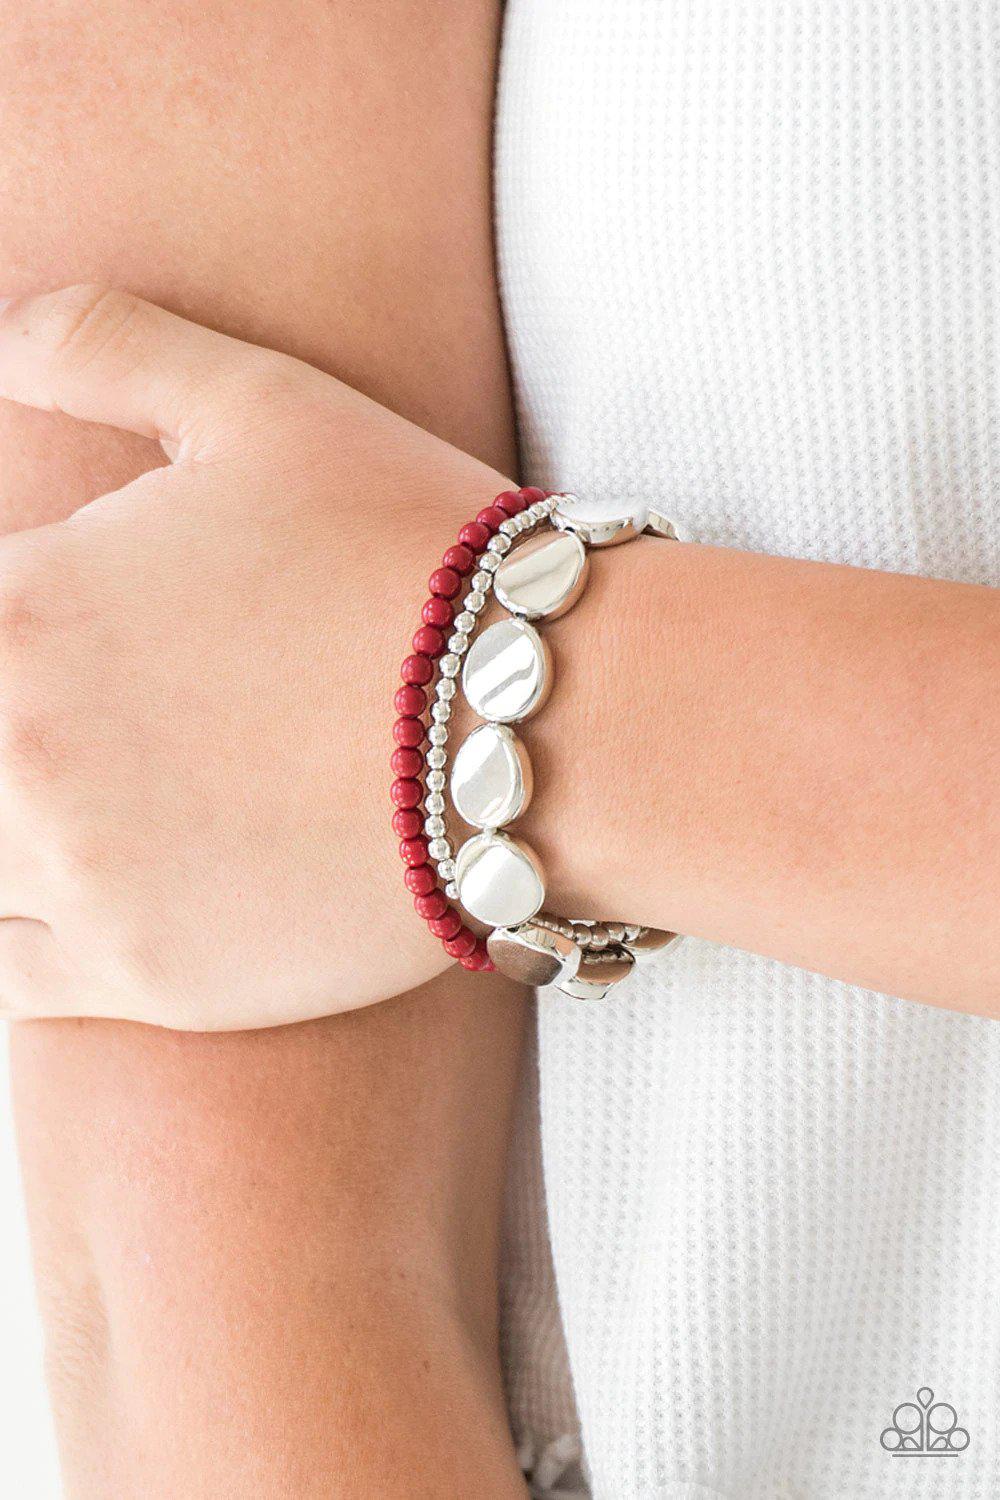 Beyond The Basics Red Bracelet - Paparazzi Accessories- lightbox - CarasShop.com - $5 Jewelry by Cara Jewels